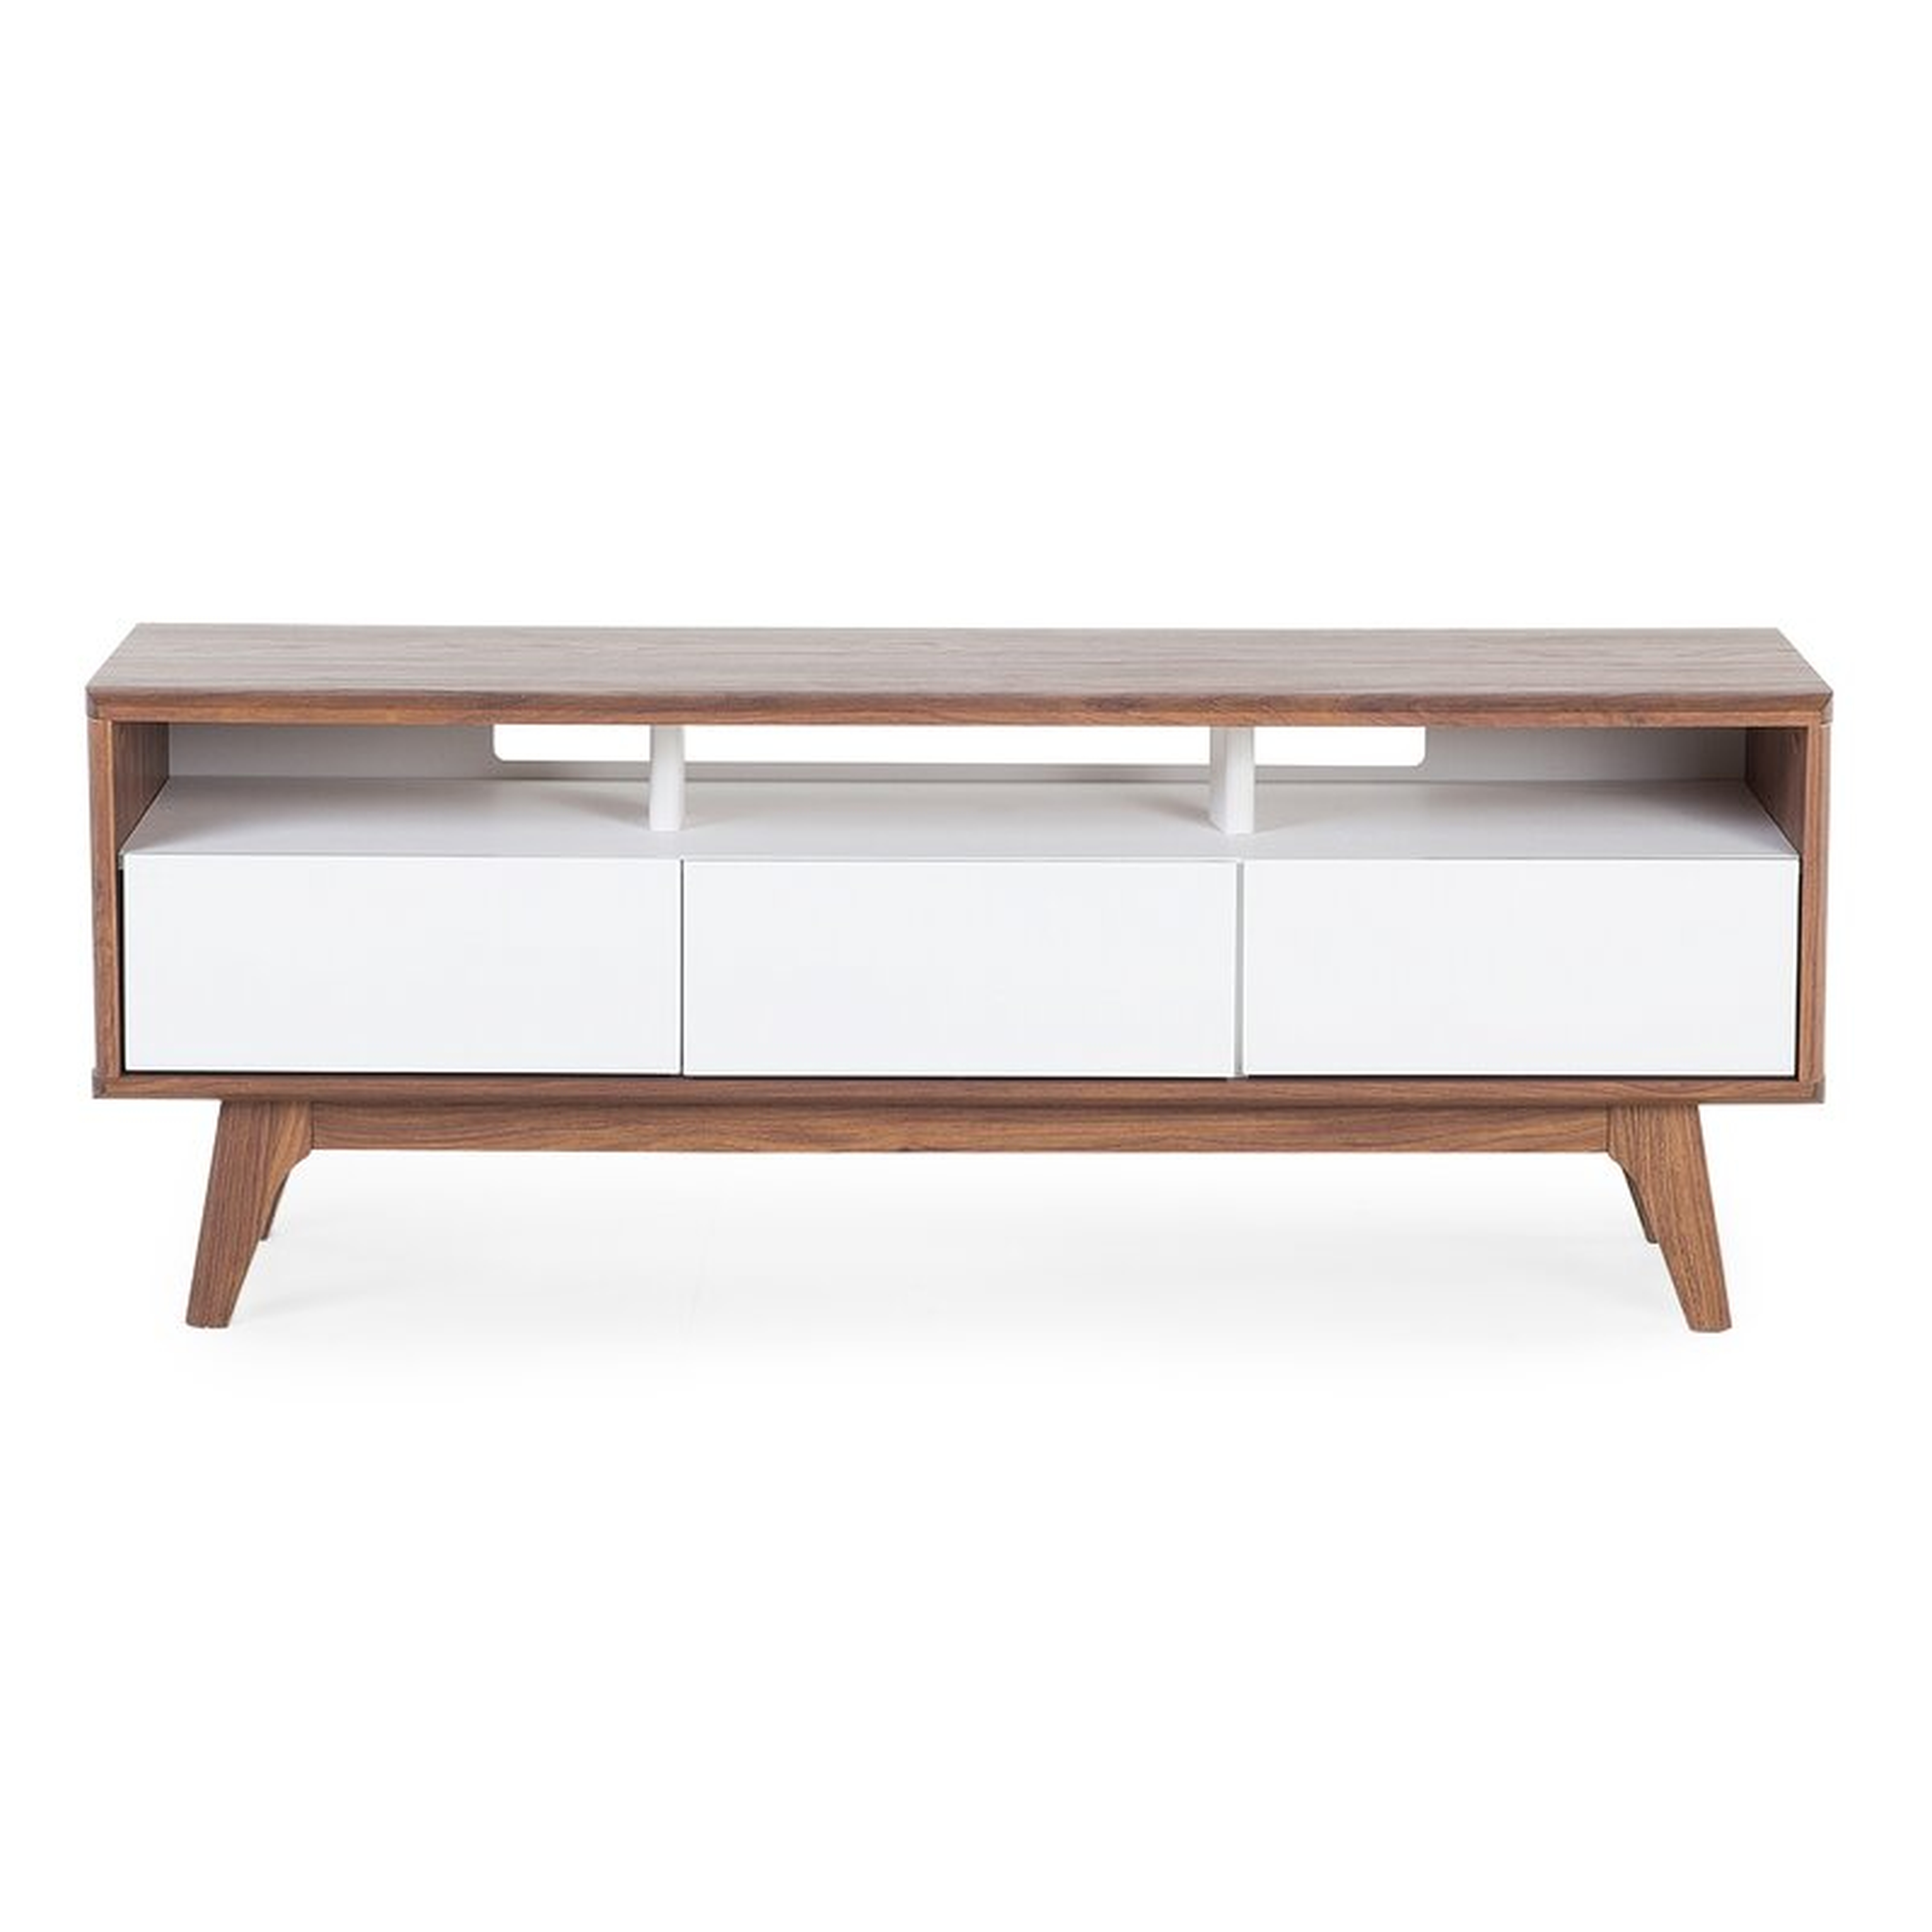 Syracuse TV Stand for TVs up to 55" - Wayfair